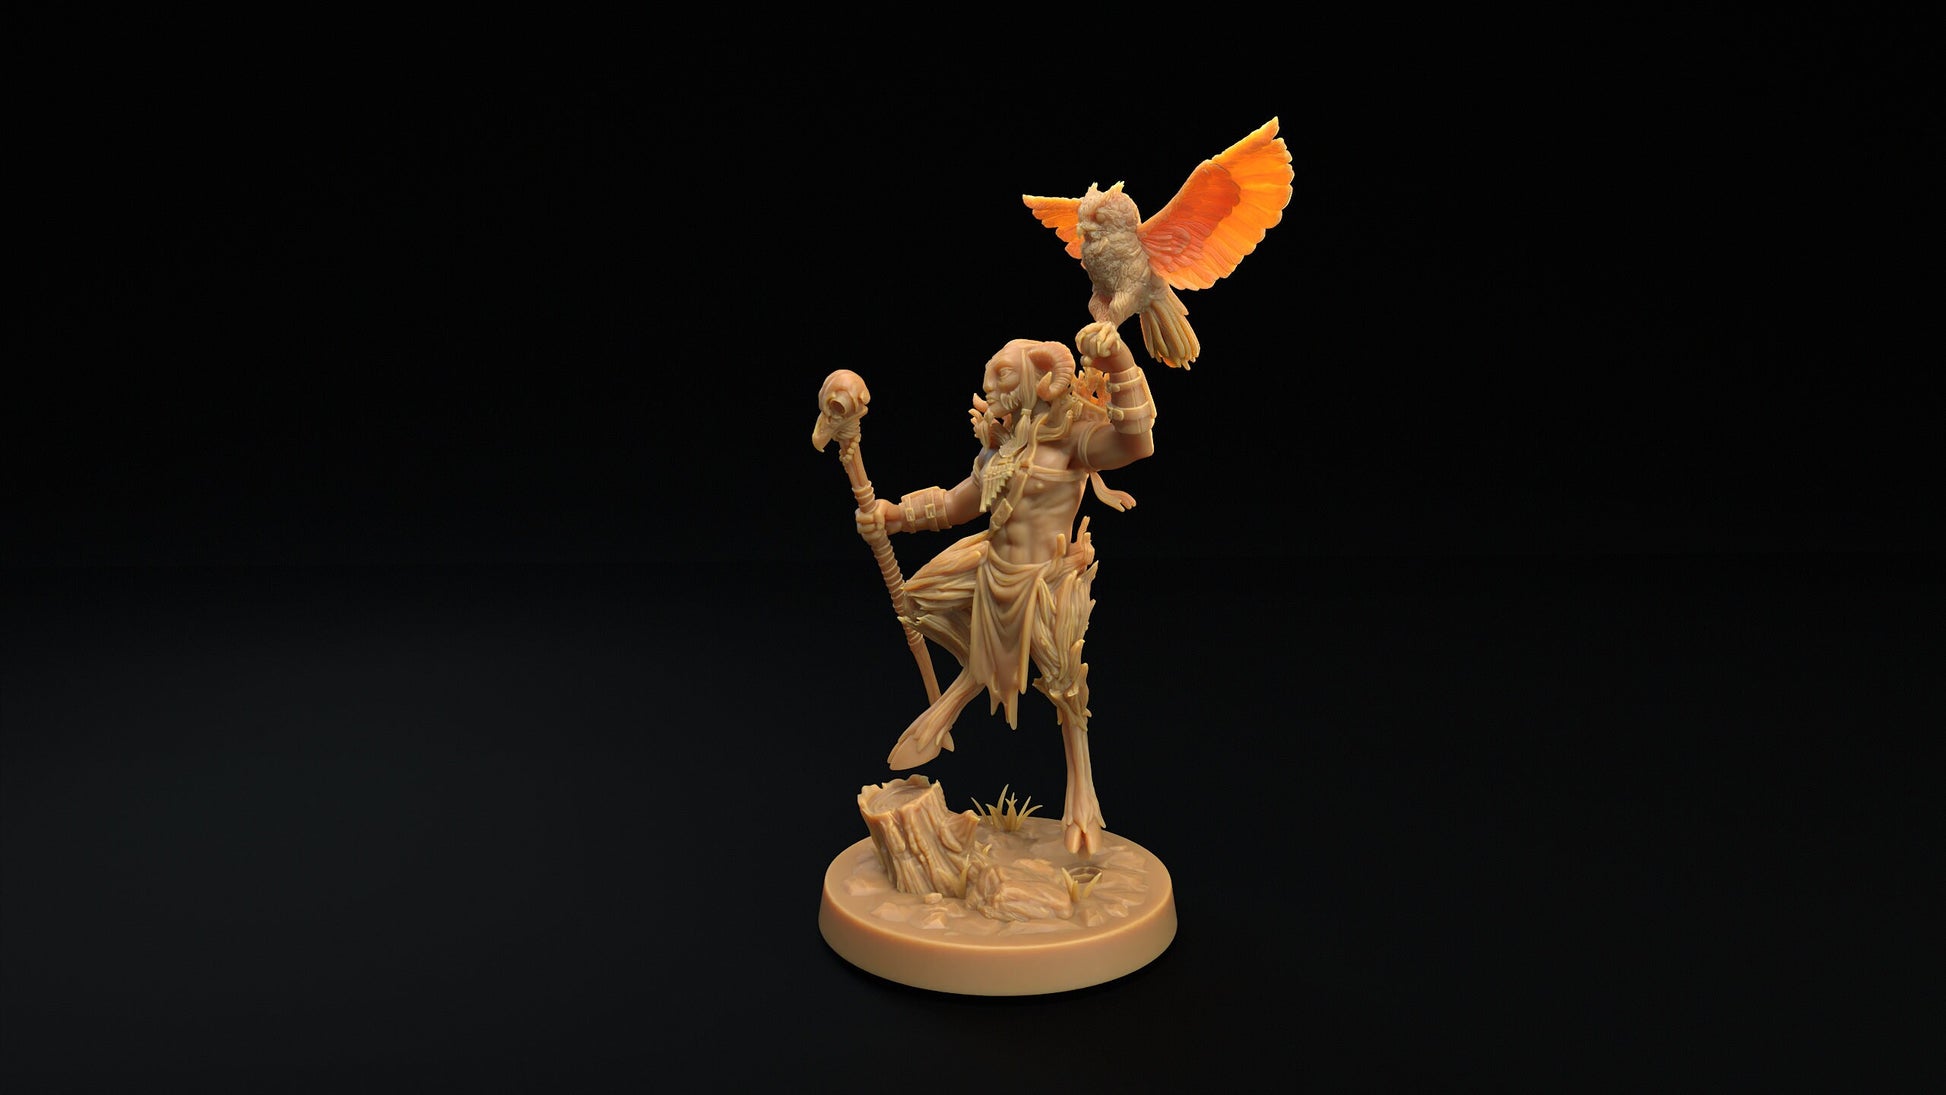 Dark Stalker | RPG Miniature for Dungeons and Dragons|Pathfinder|Tabletop Wargaming | Fey Miniature | Dragon Trappers Lodge